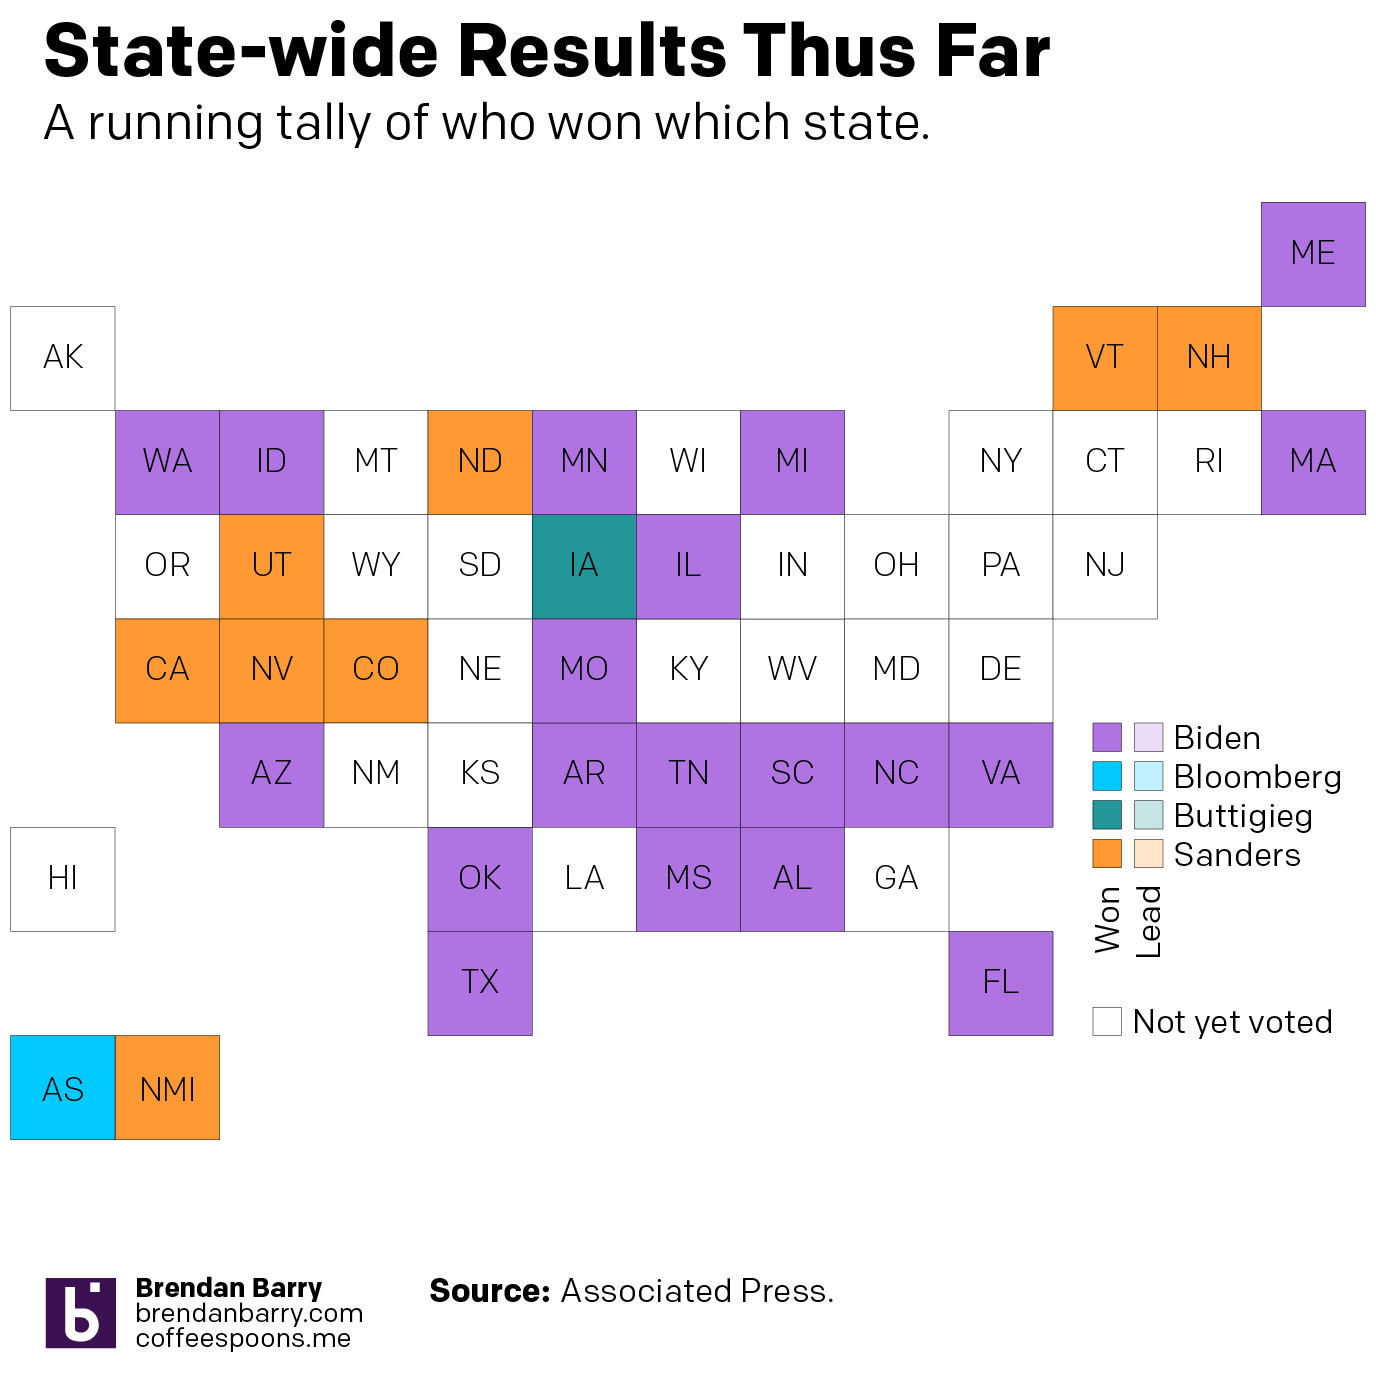 Who has won each state